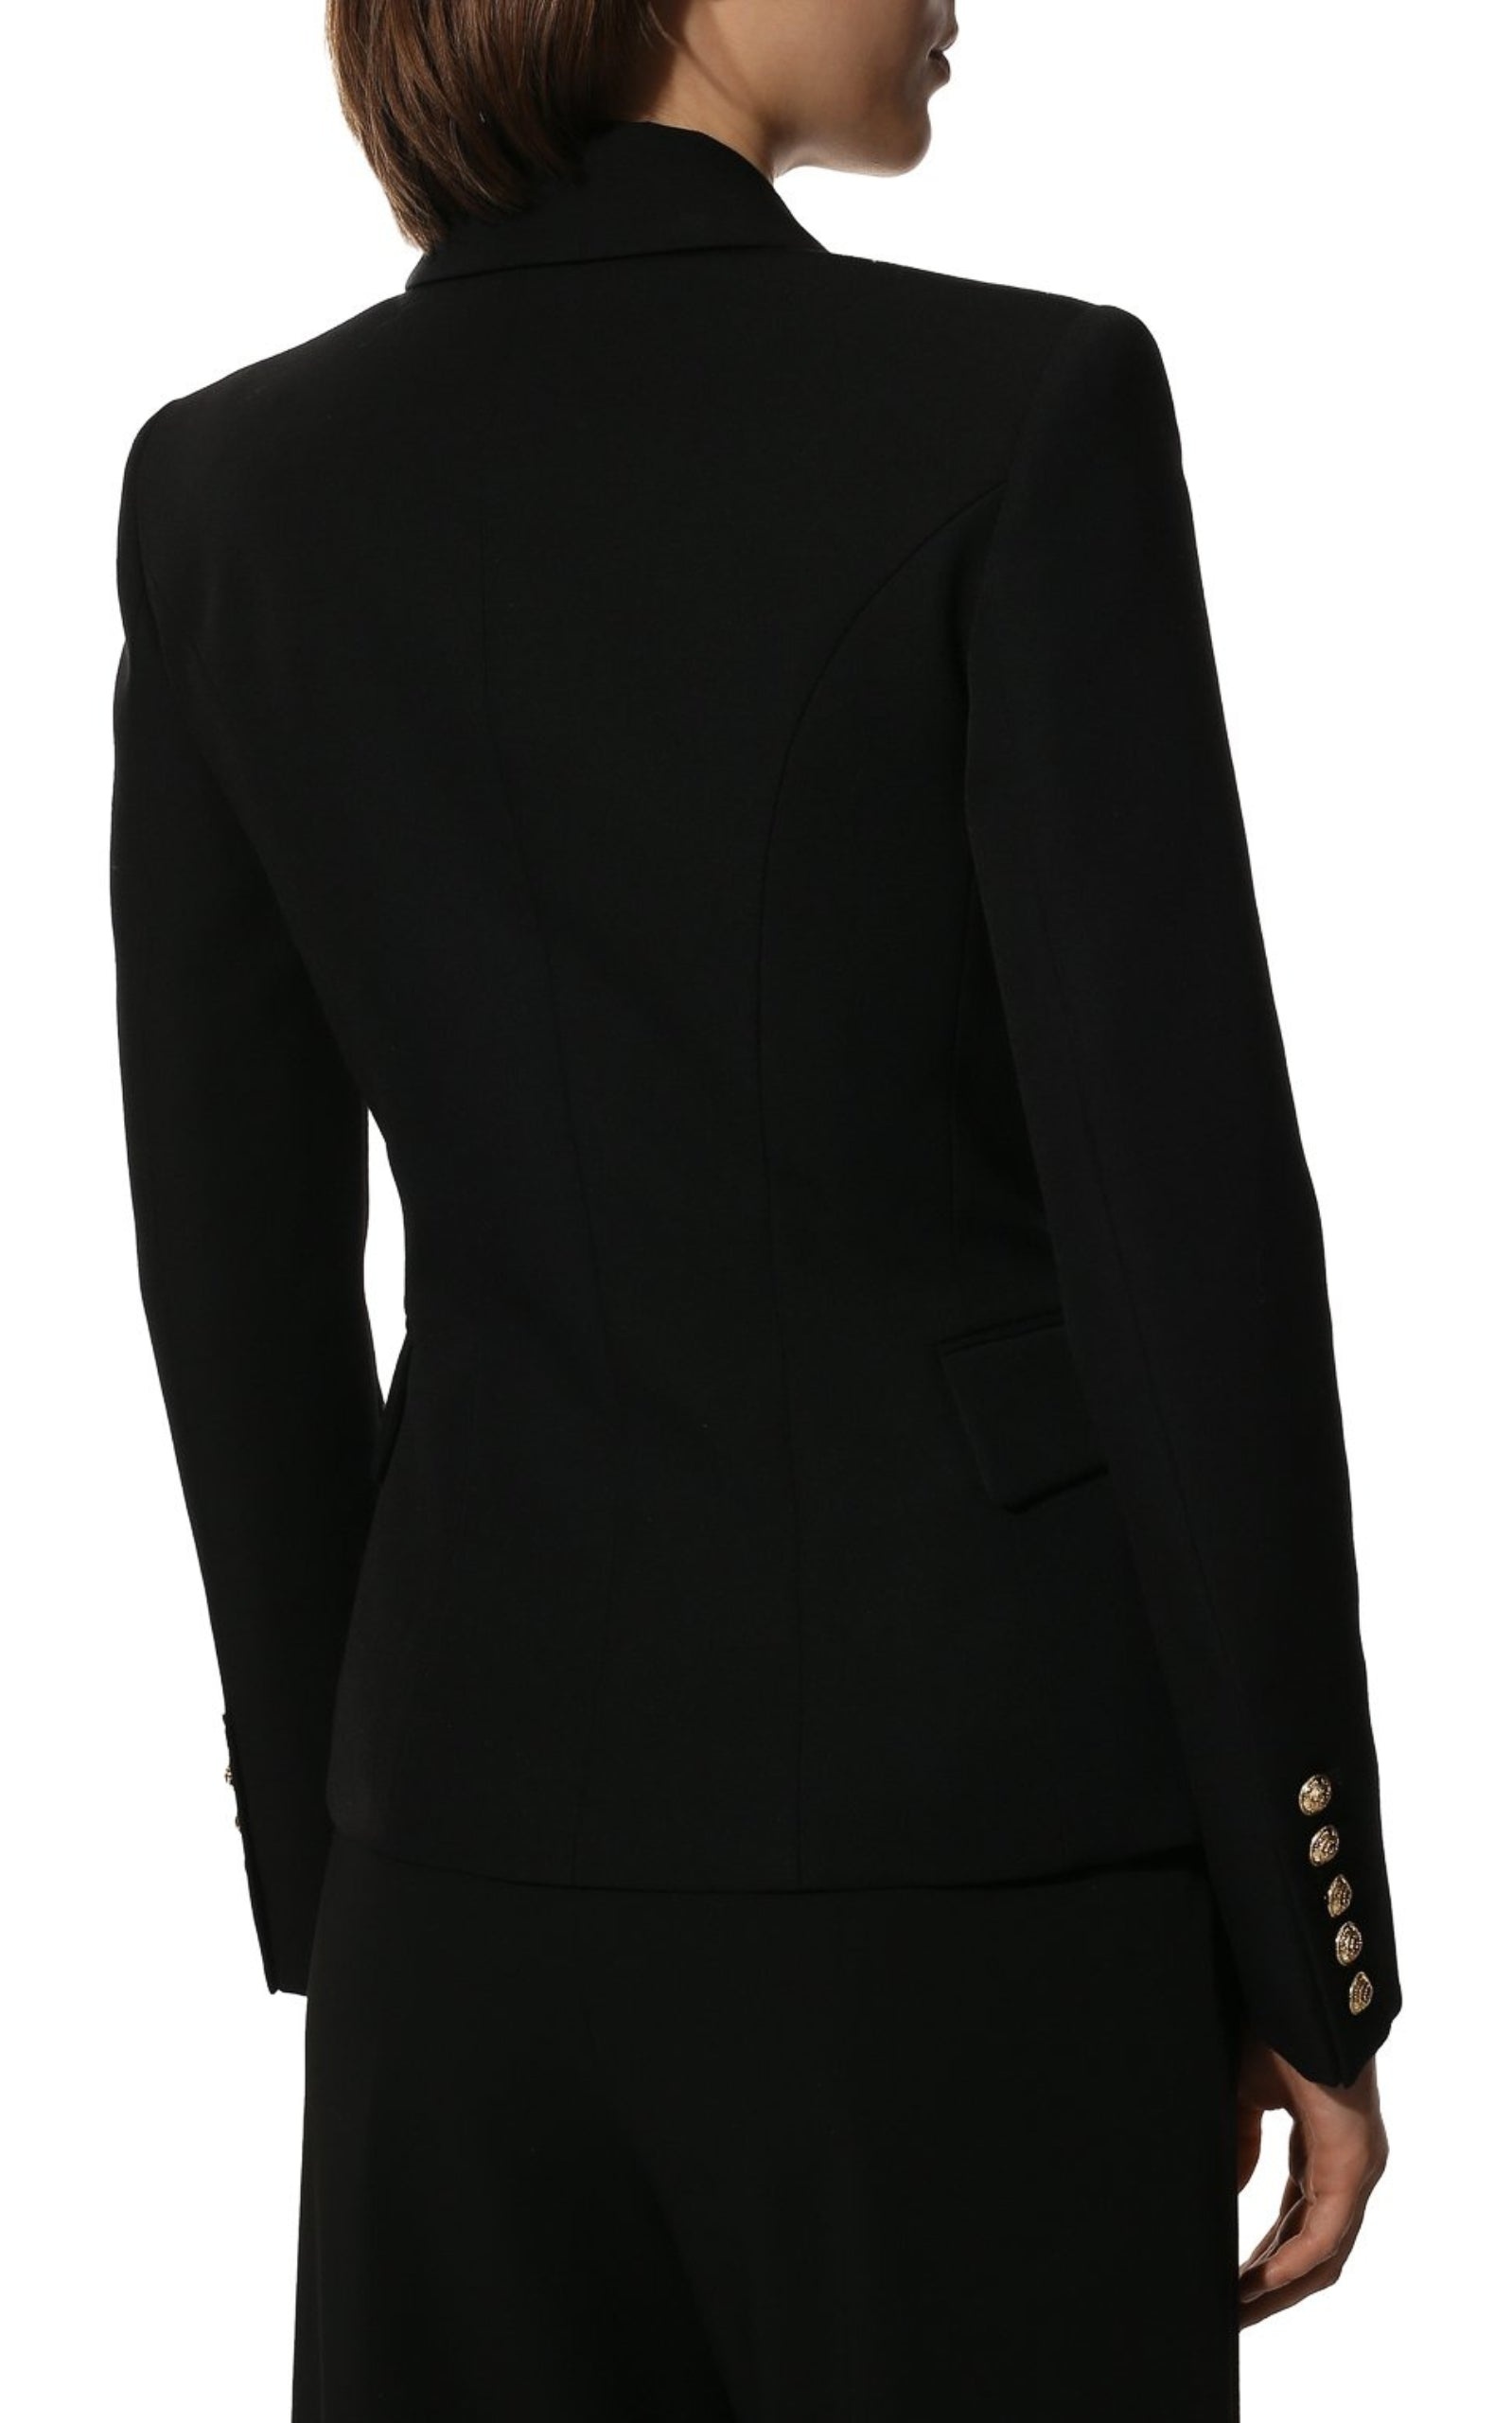 Black Wool Classic Double-Breasted Blazer Jacket - 4